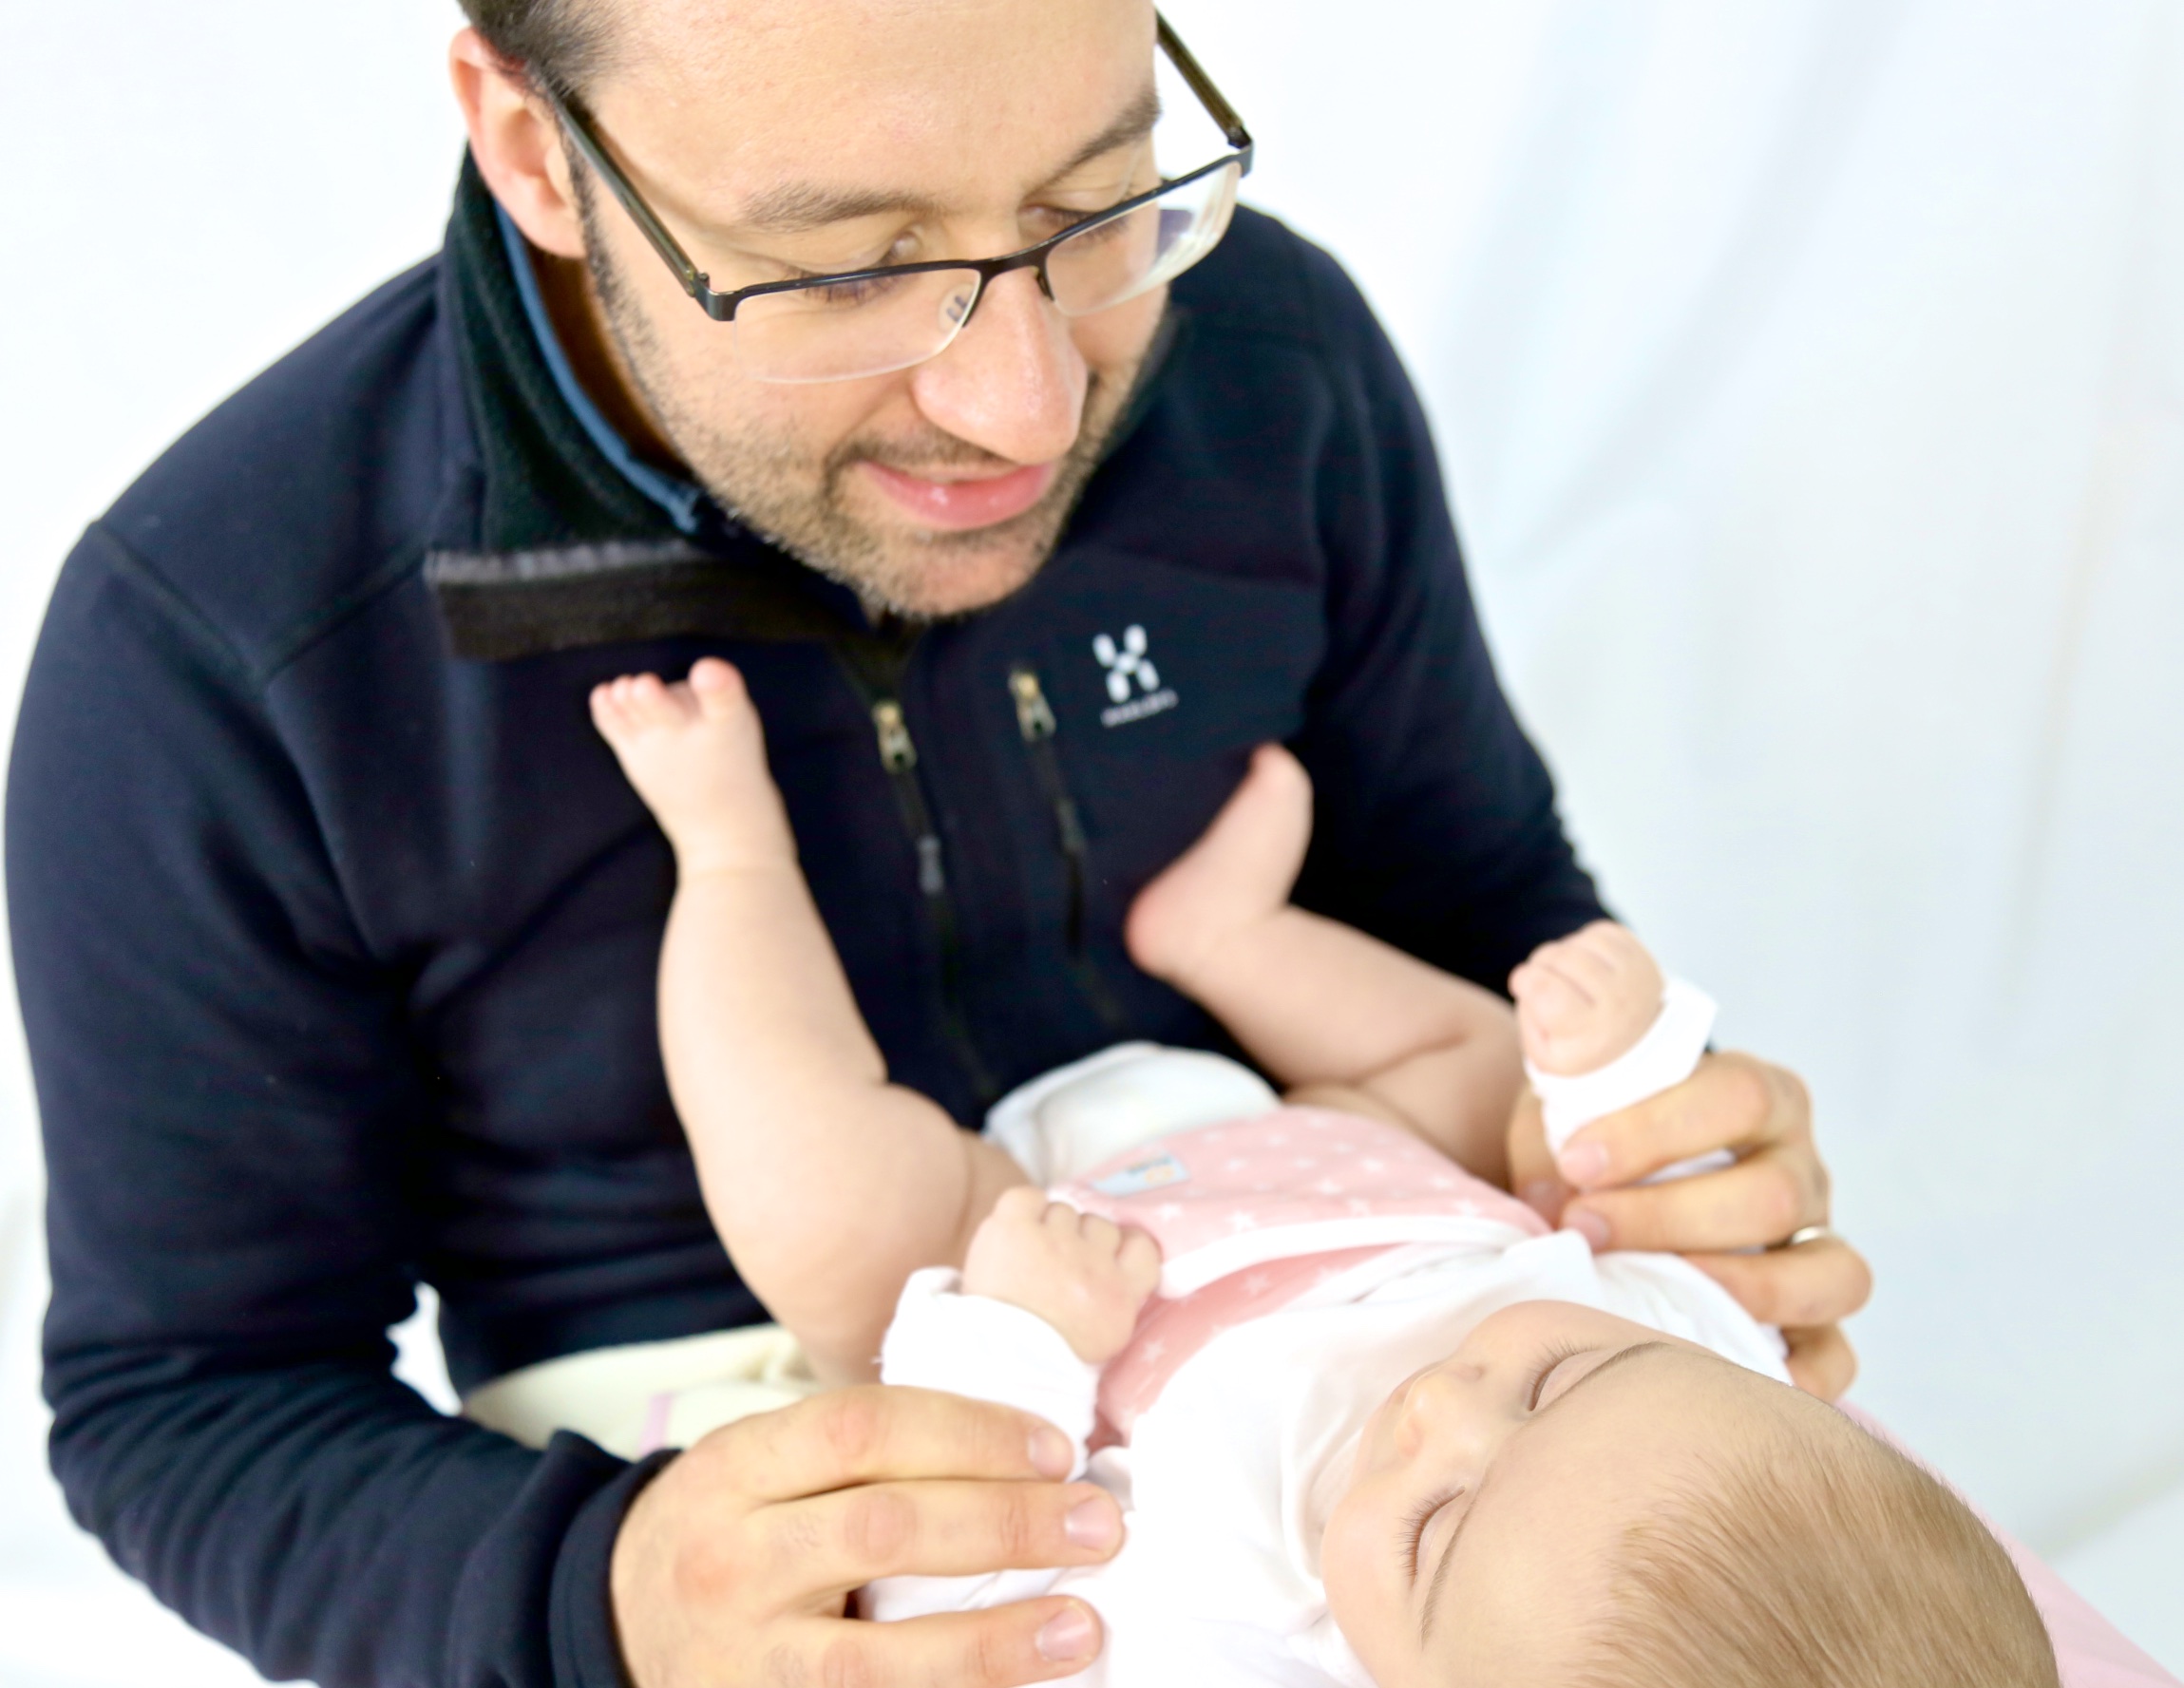 What treatments are there for baby colic?